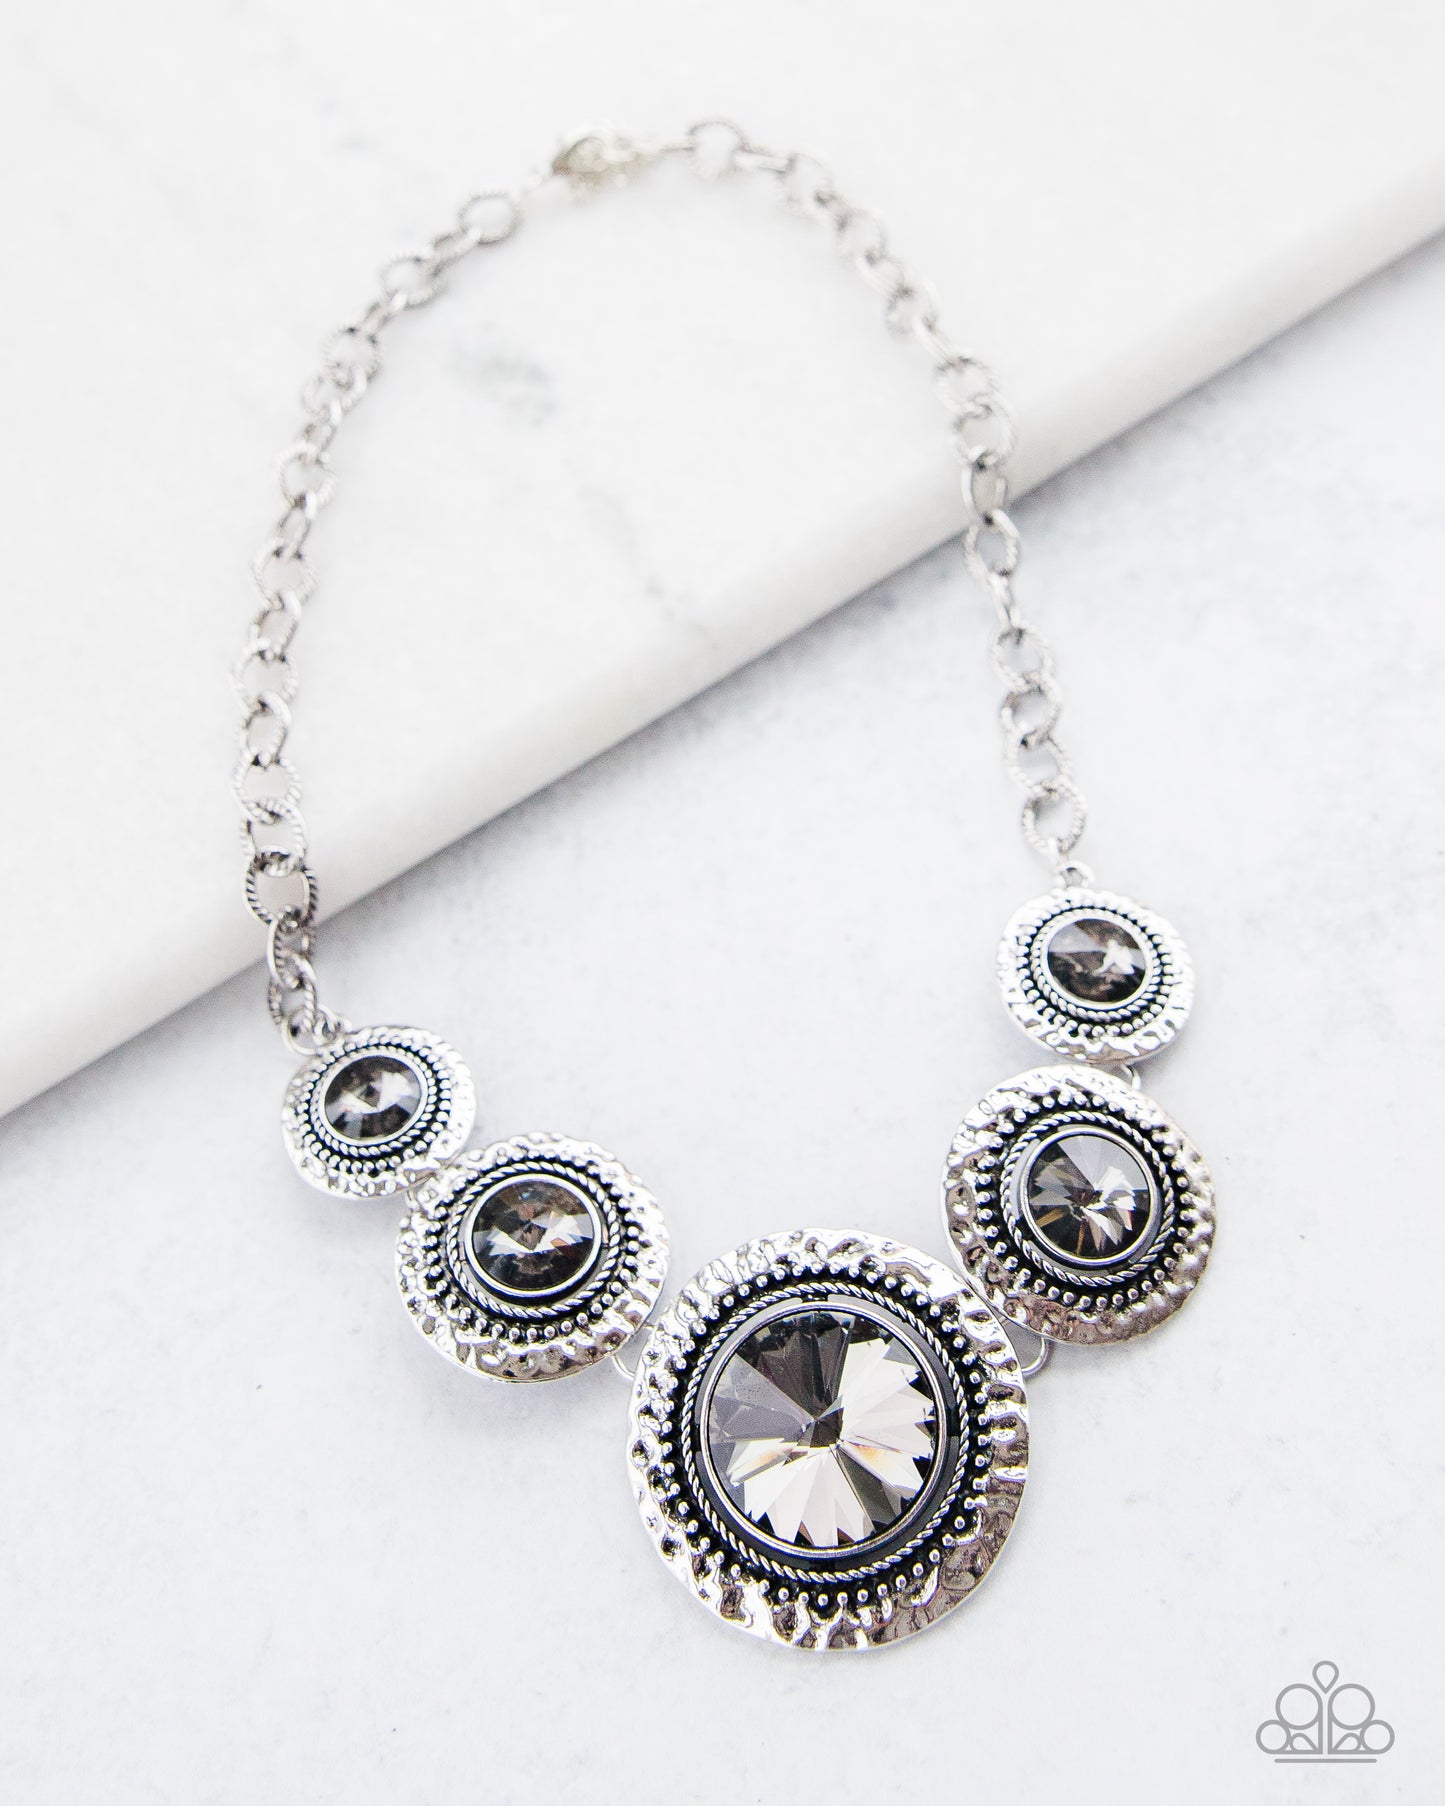 Global Glamour - Silver necklace set